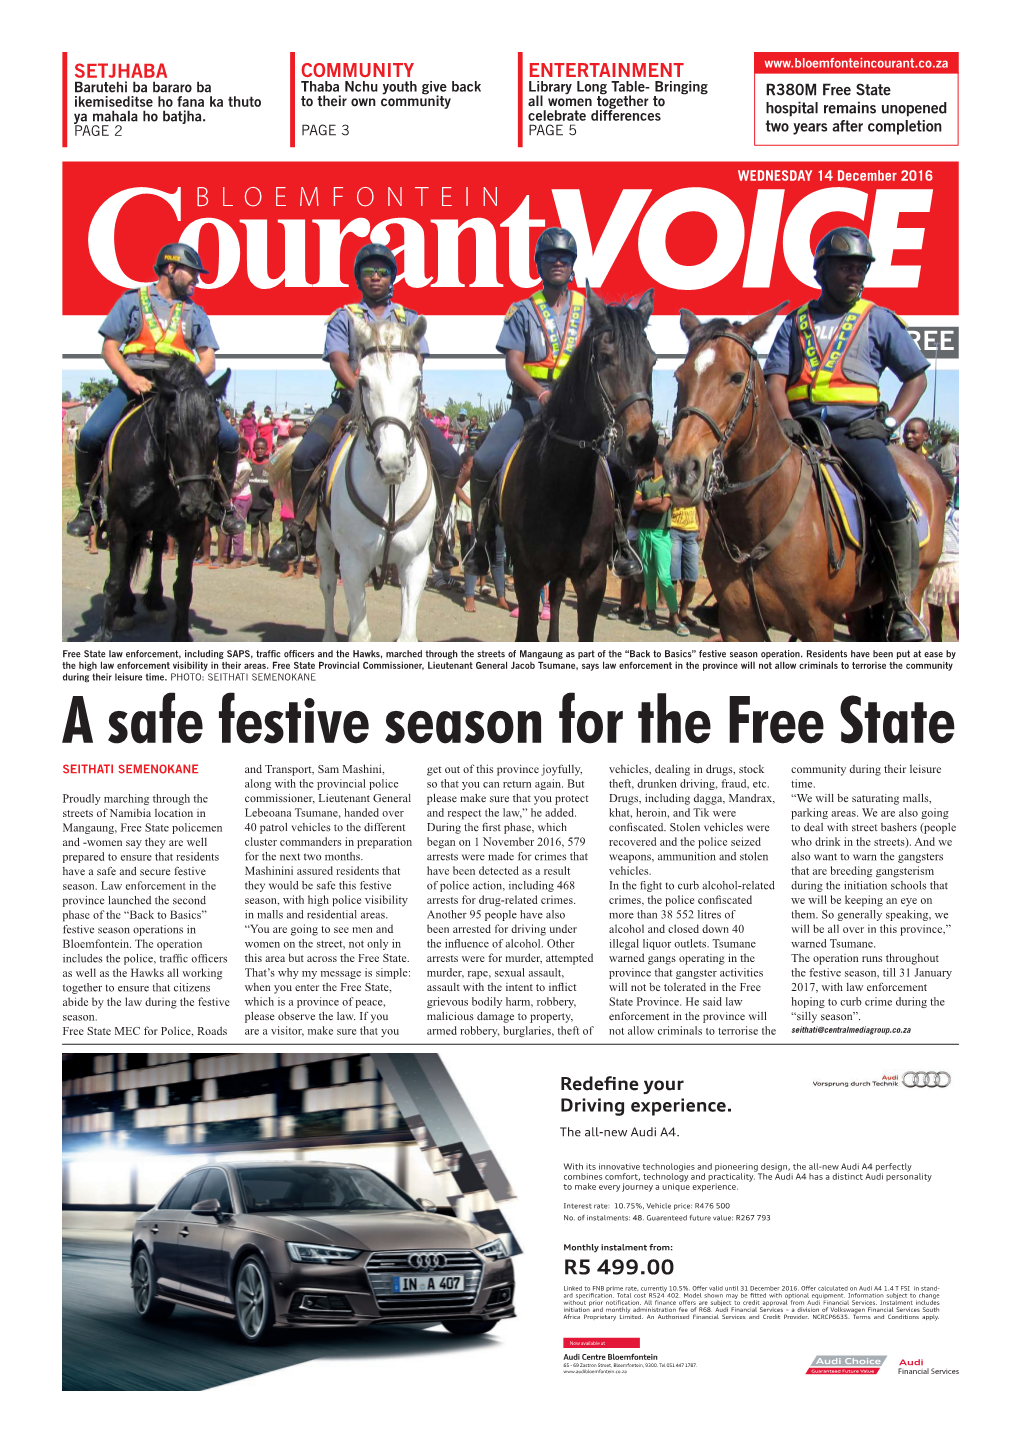 A Safe Festive Season for the Free State